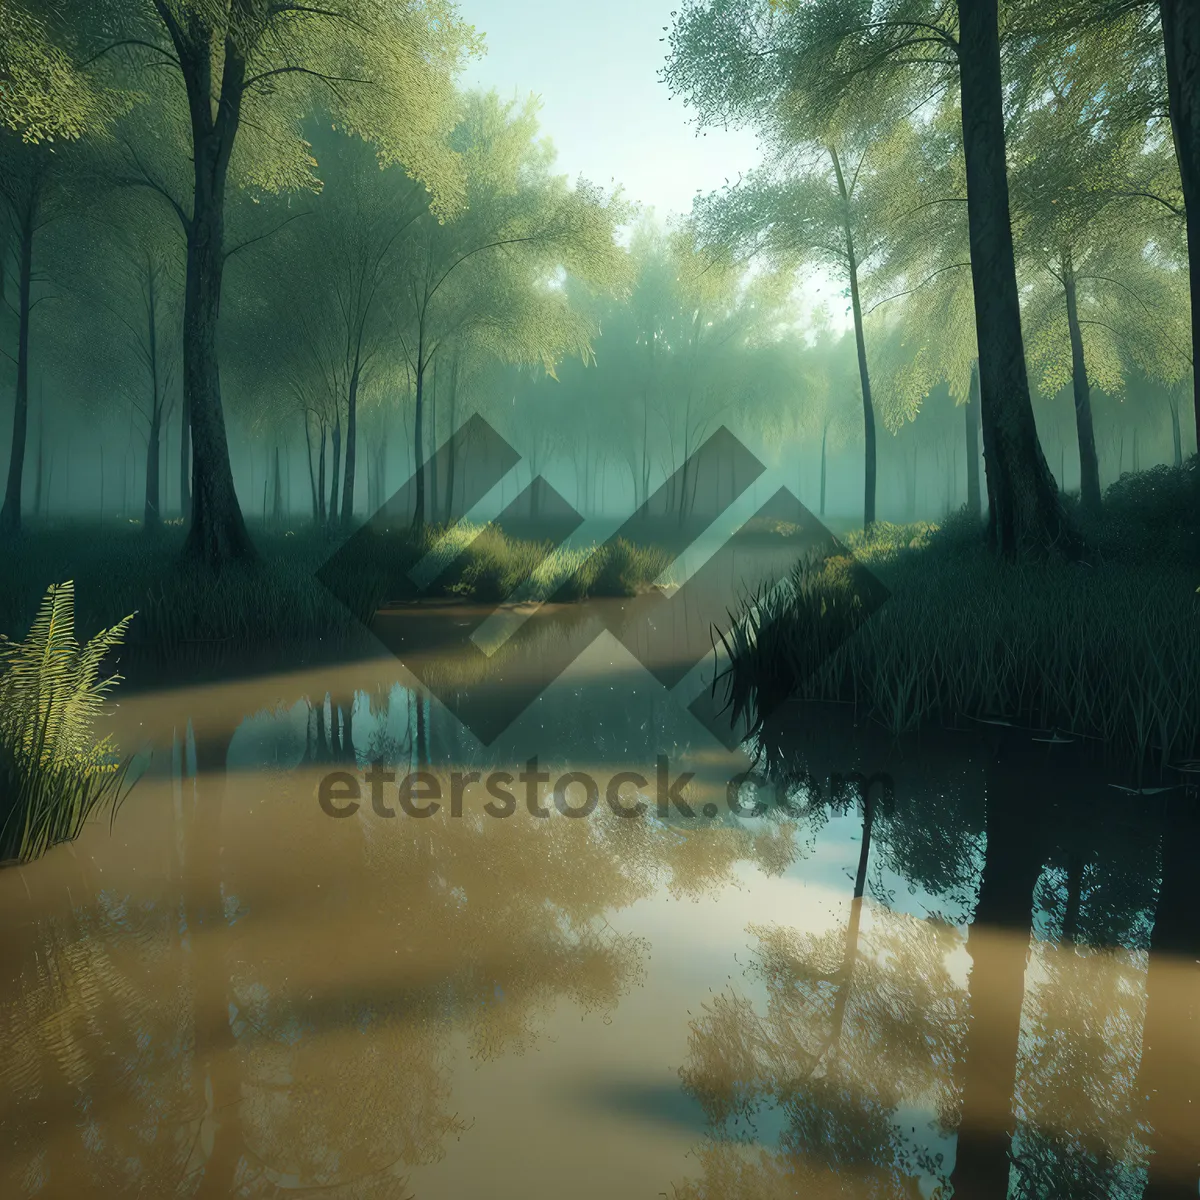 Picture of Serene River Amongst Lush Forest